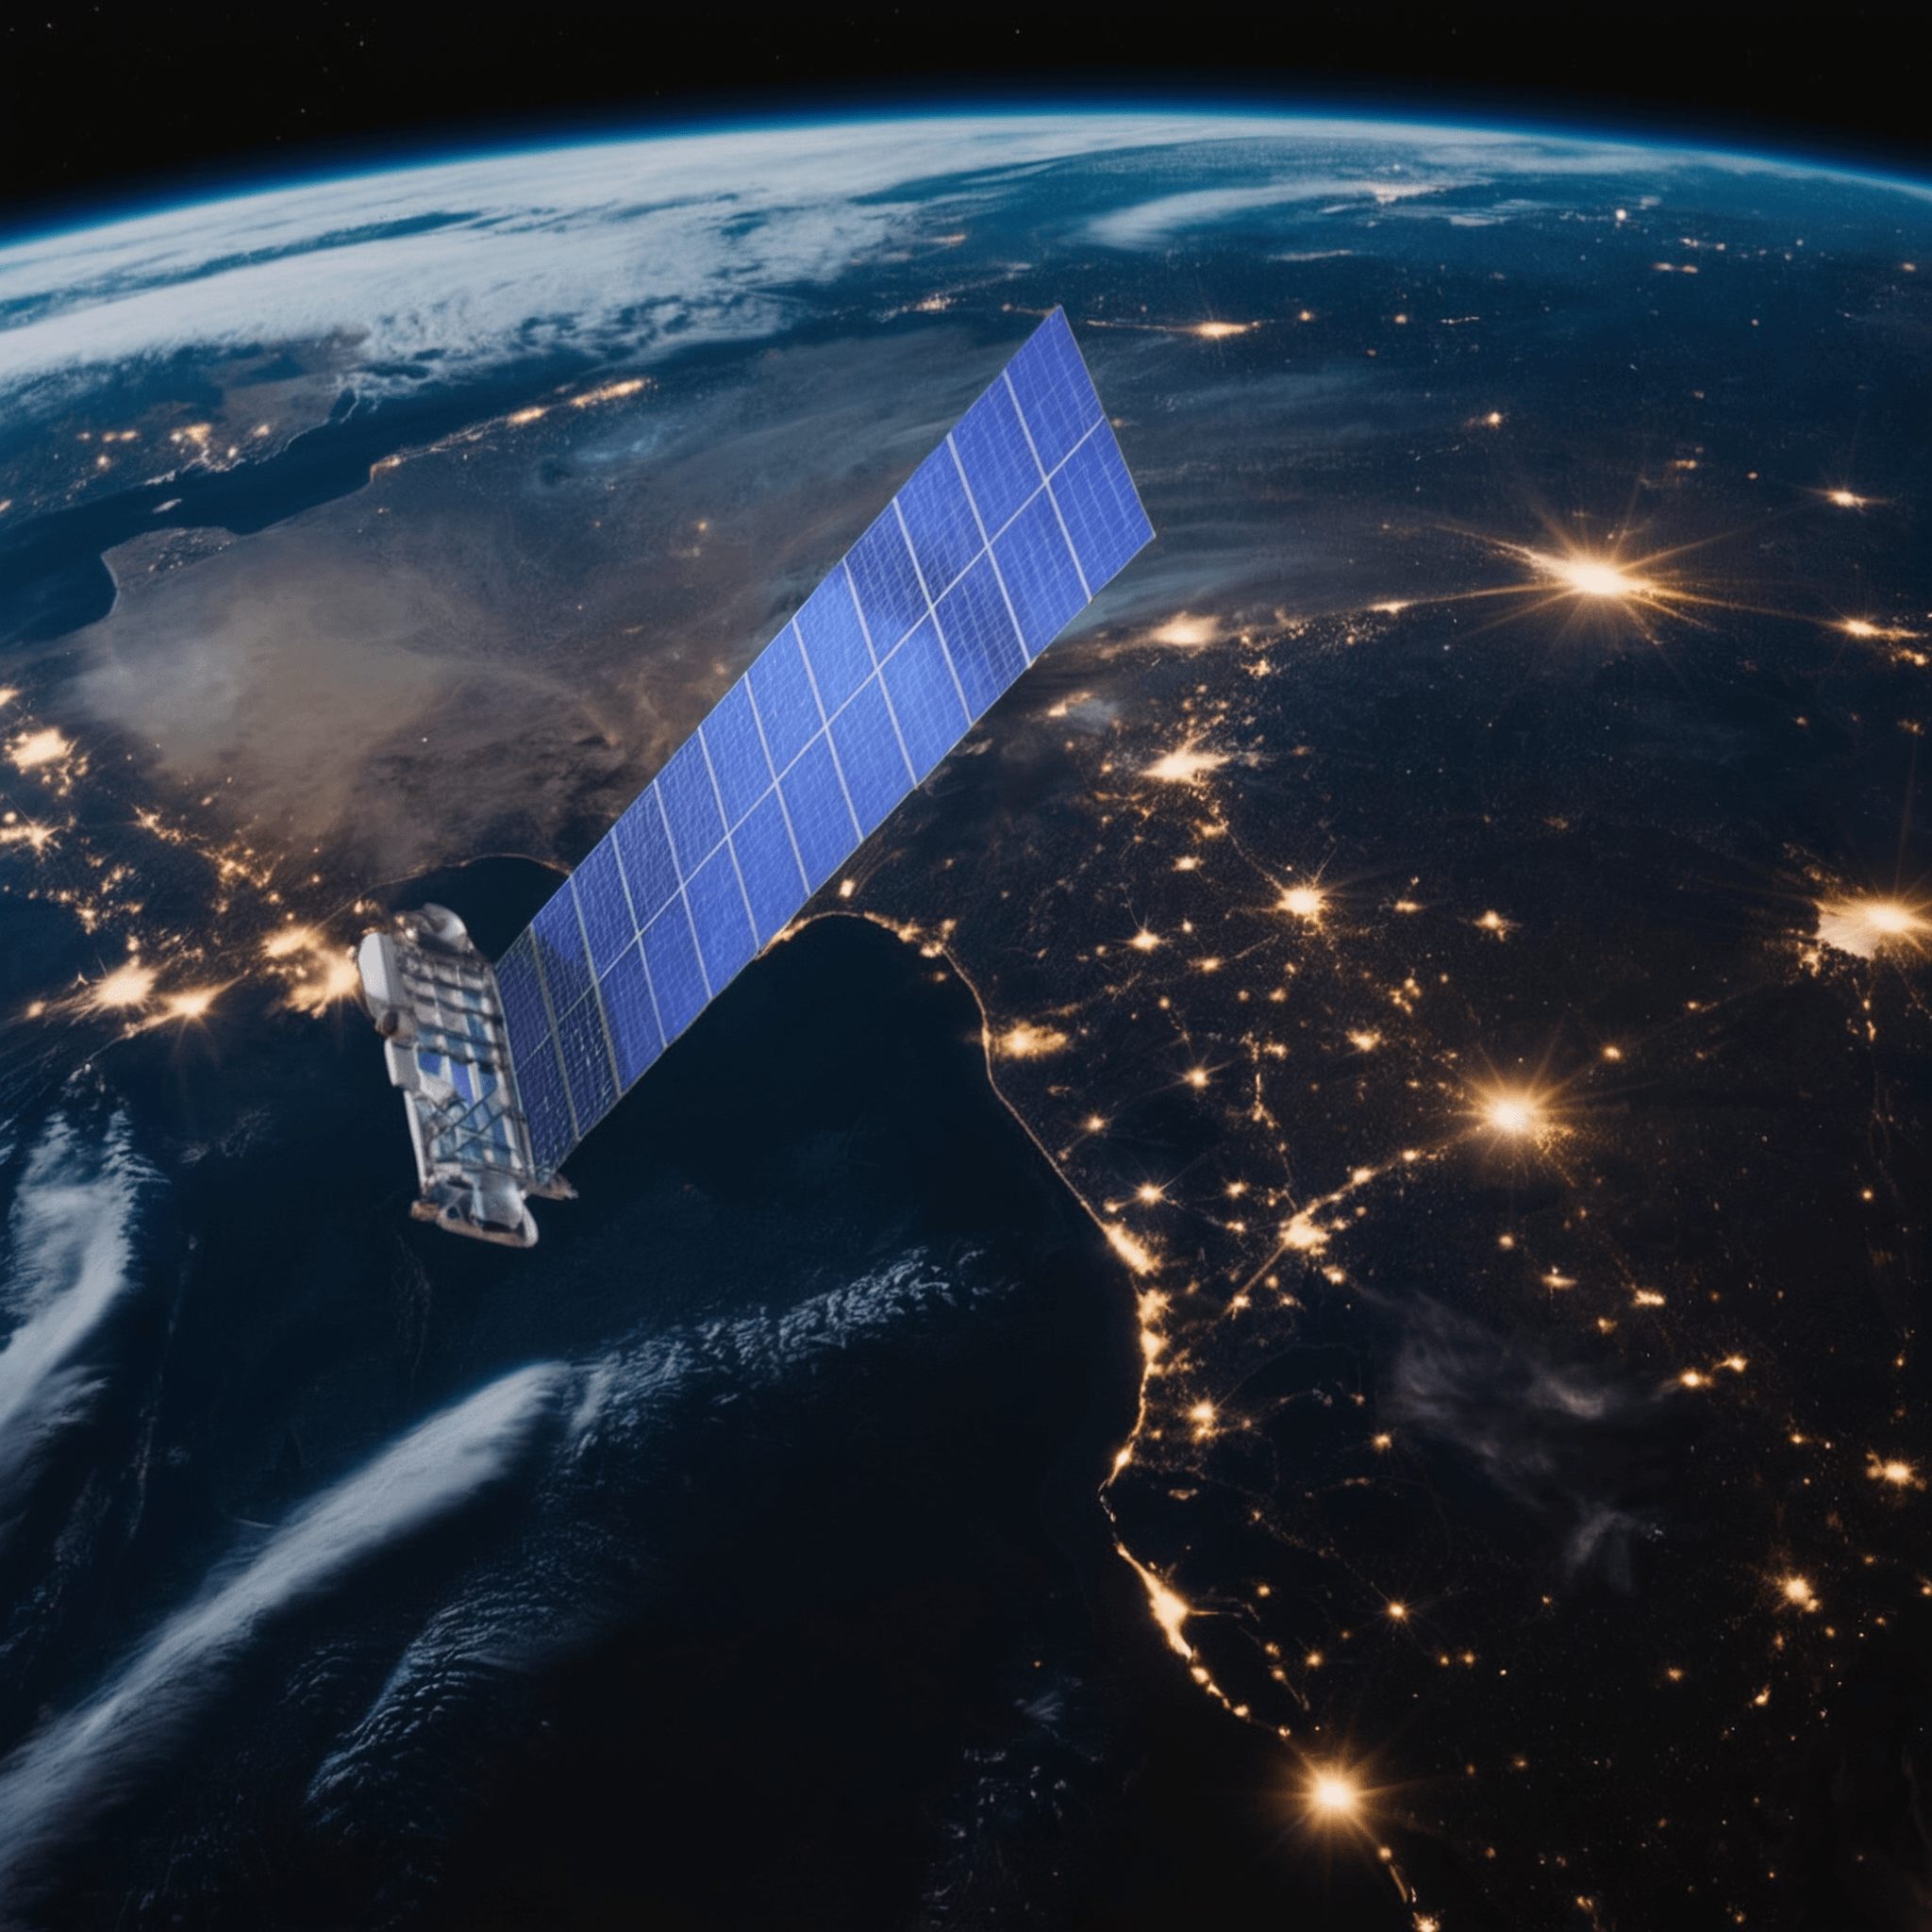 SpaceX and Amazon Are Playing for Keeps to Control Satellite Broadband and Connect the World. But Is There Room for Both in the Orbit?